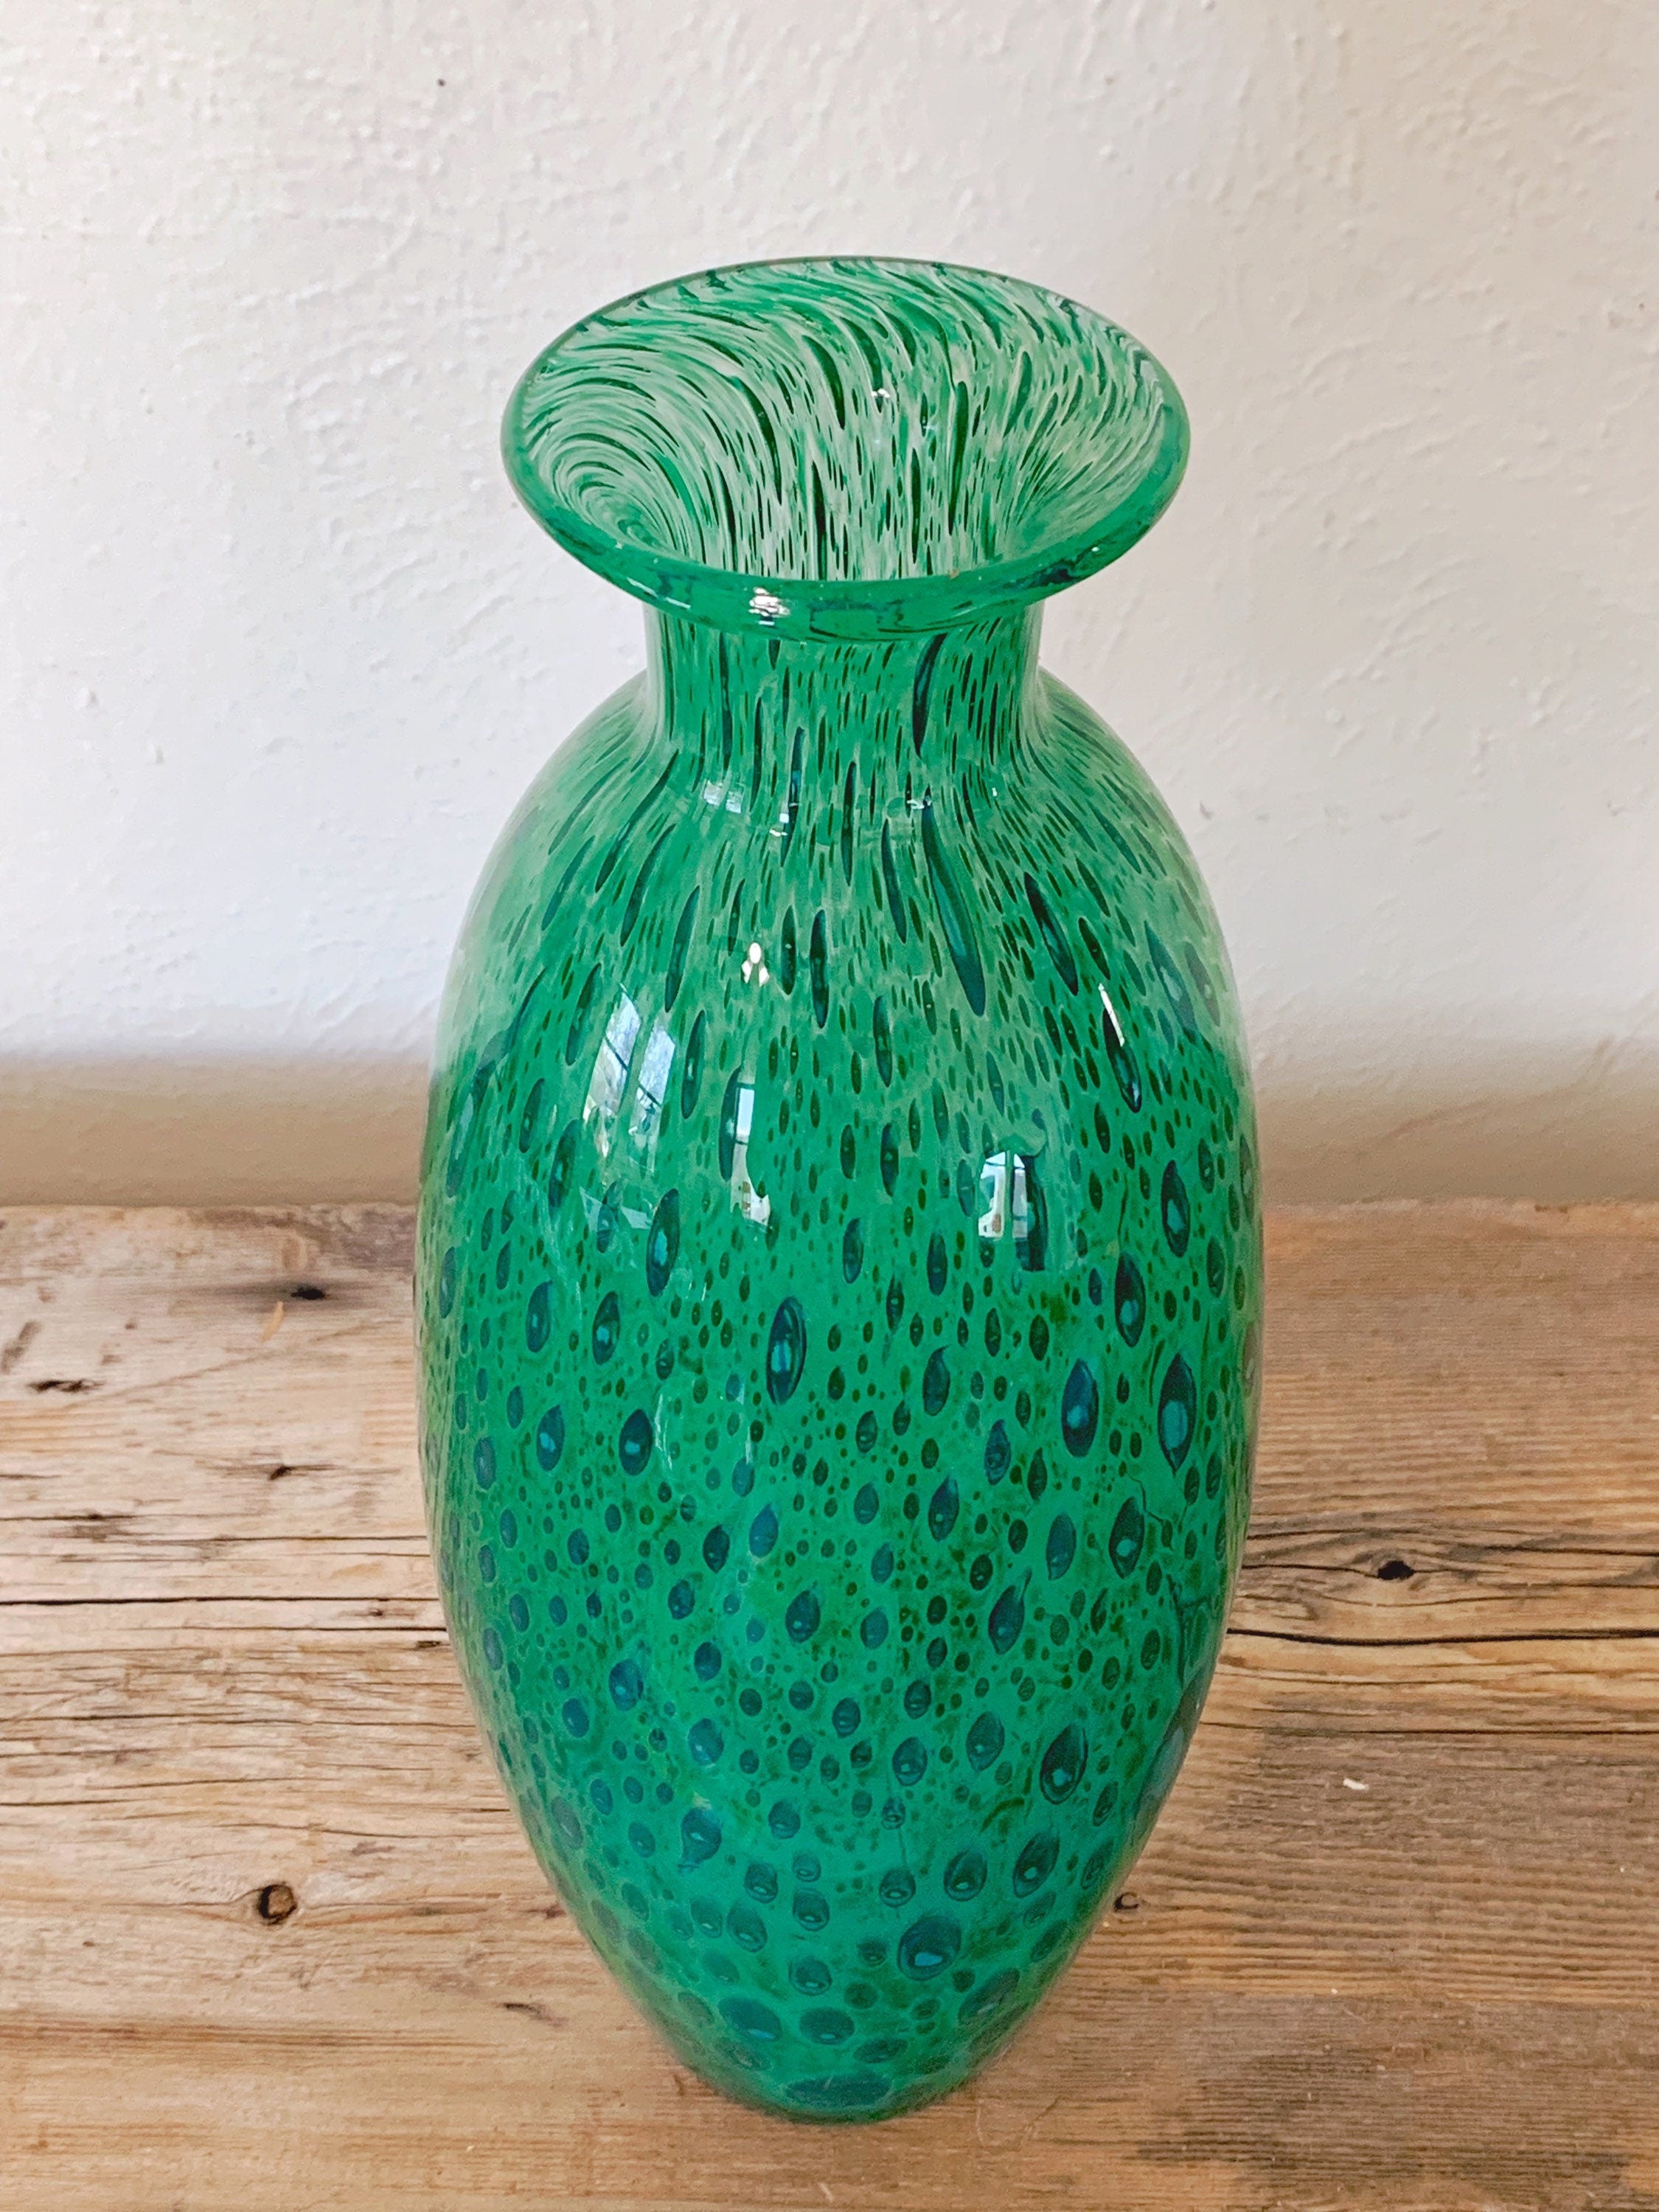 Vintage Hand Blown Studio Art Glass Vase in Green Peacock Colors | Flower Vase Contemporary Home Decor | Mother's Day Gift Housewarming Gift